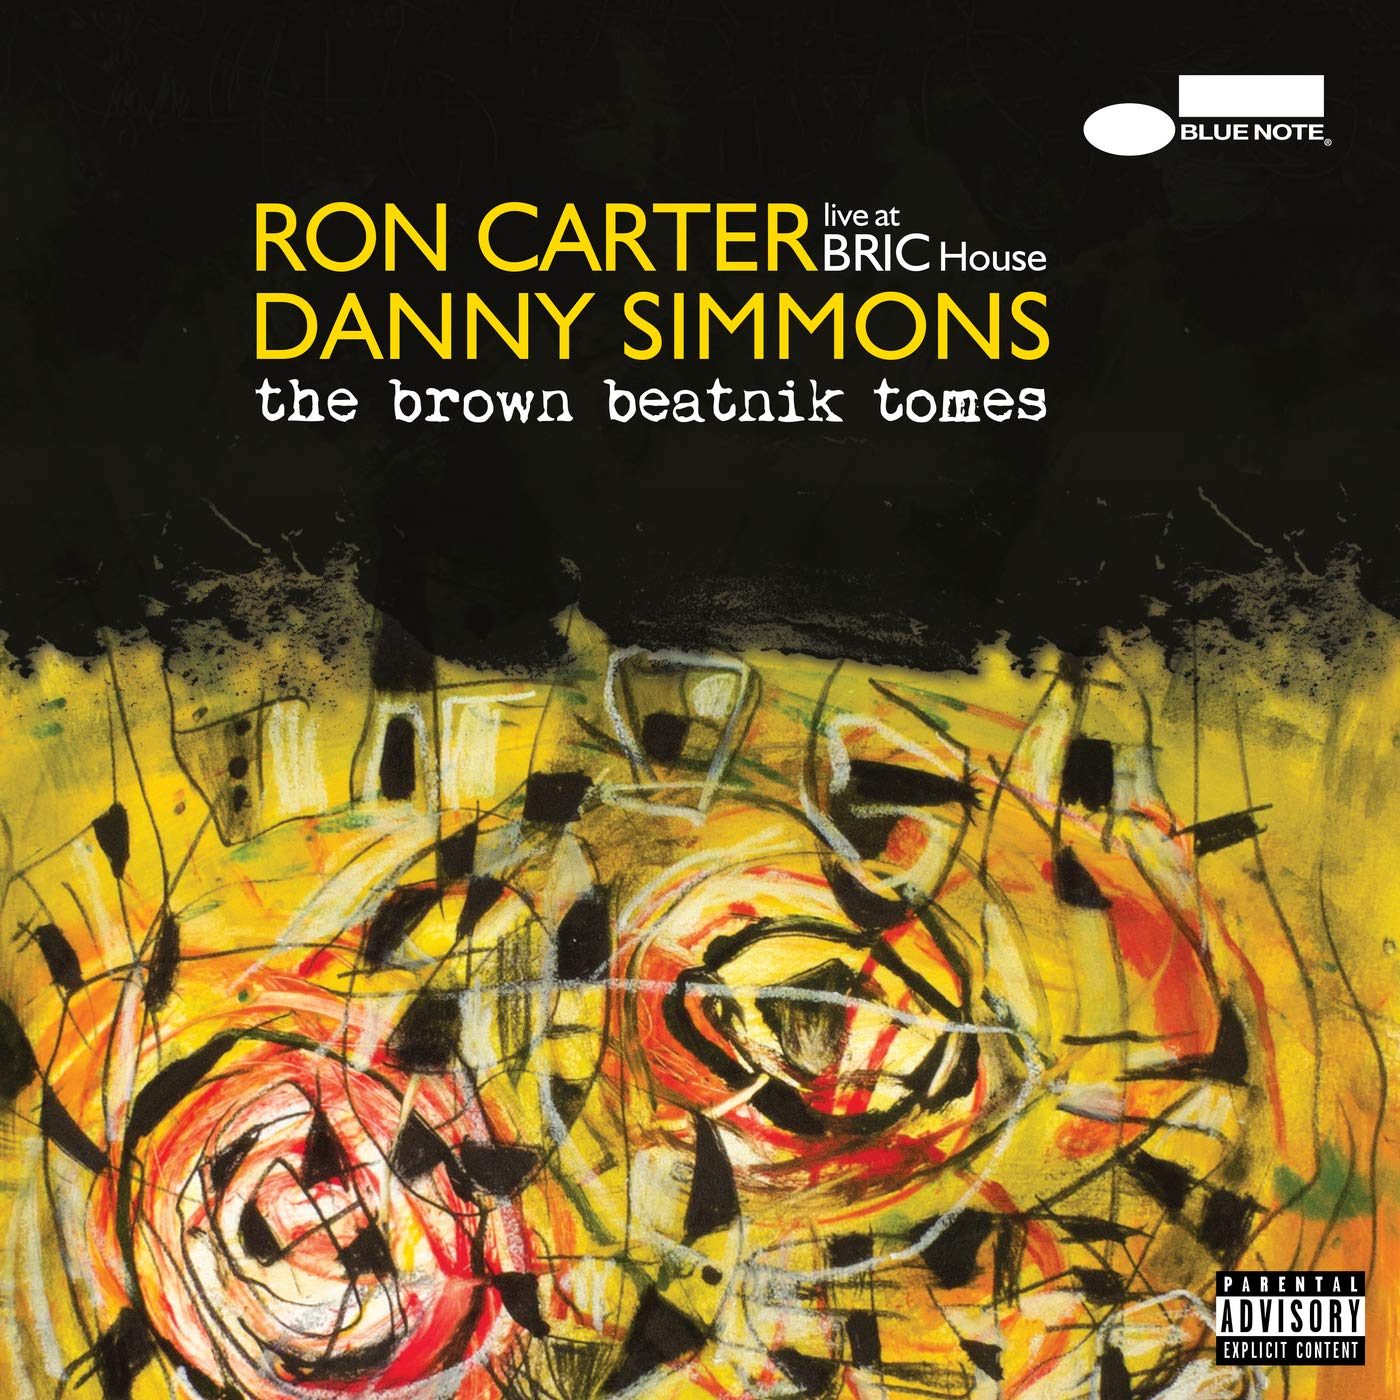 Ron Carter and Danny Simmons: The Brown Beatnik Tomes – Live at BRIC House